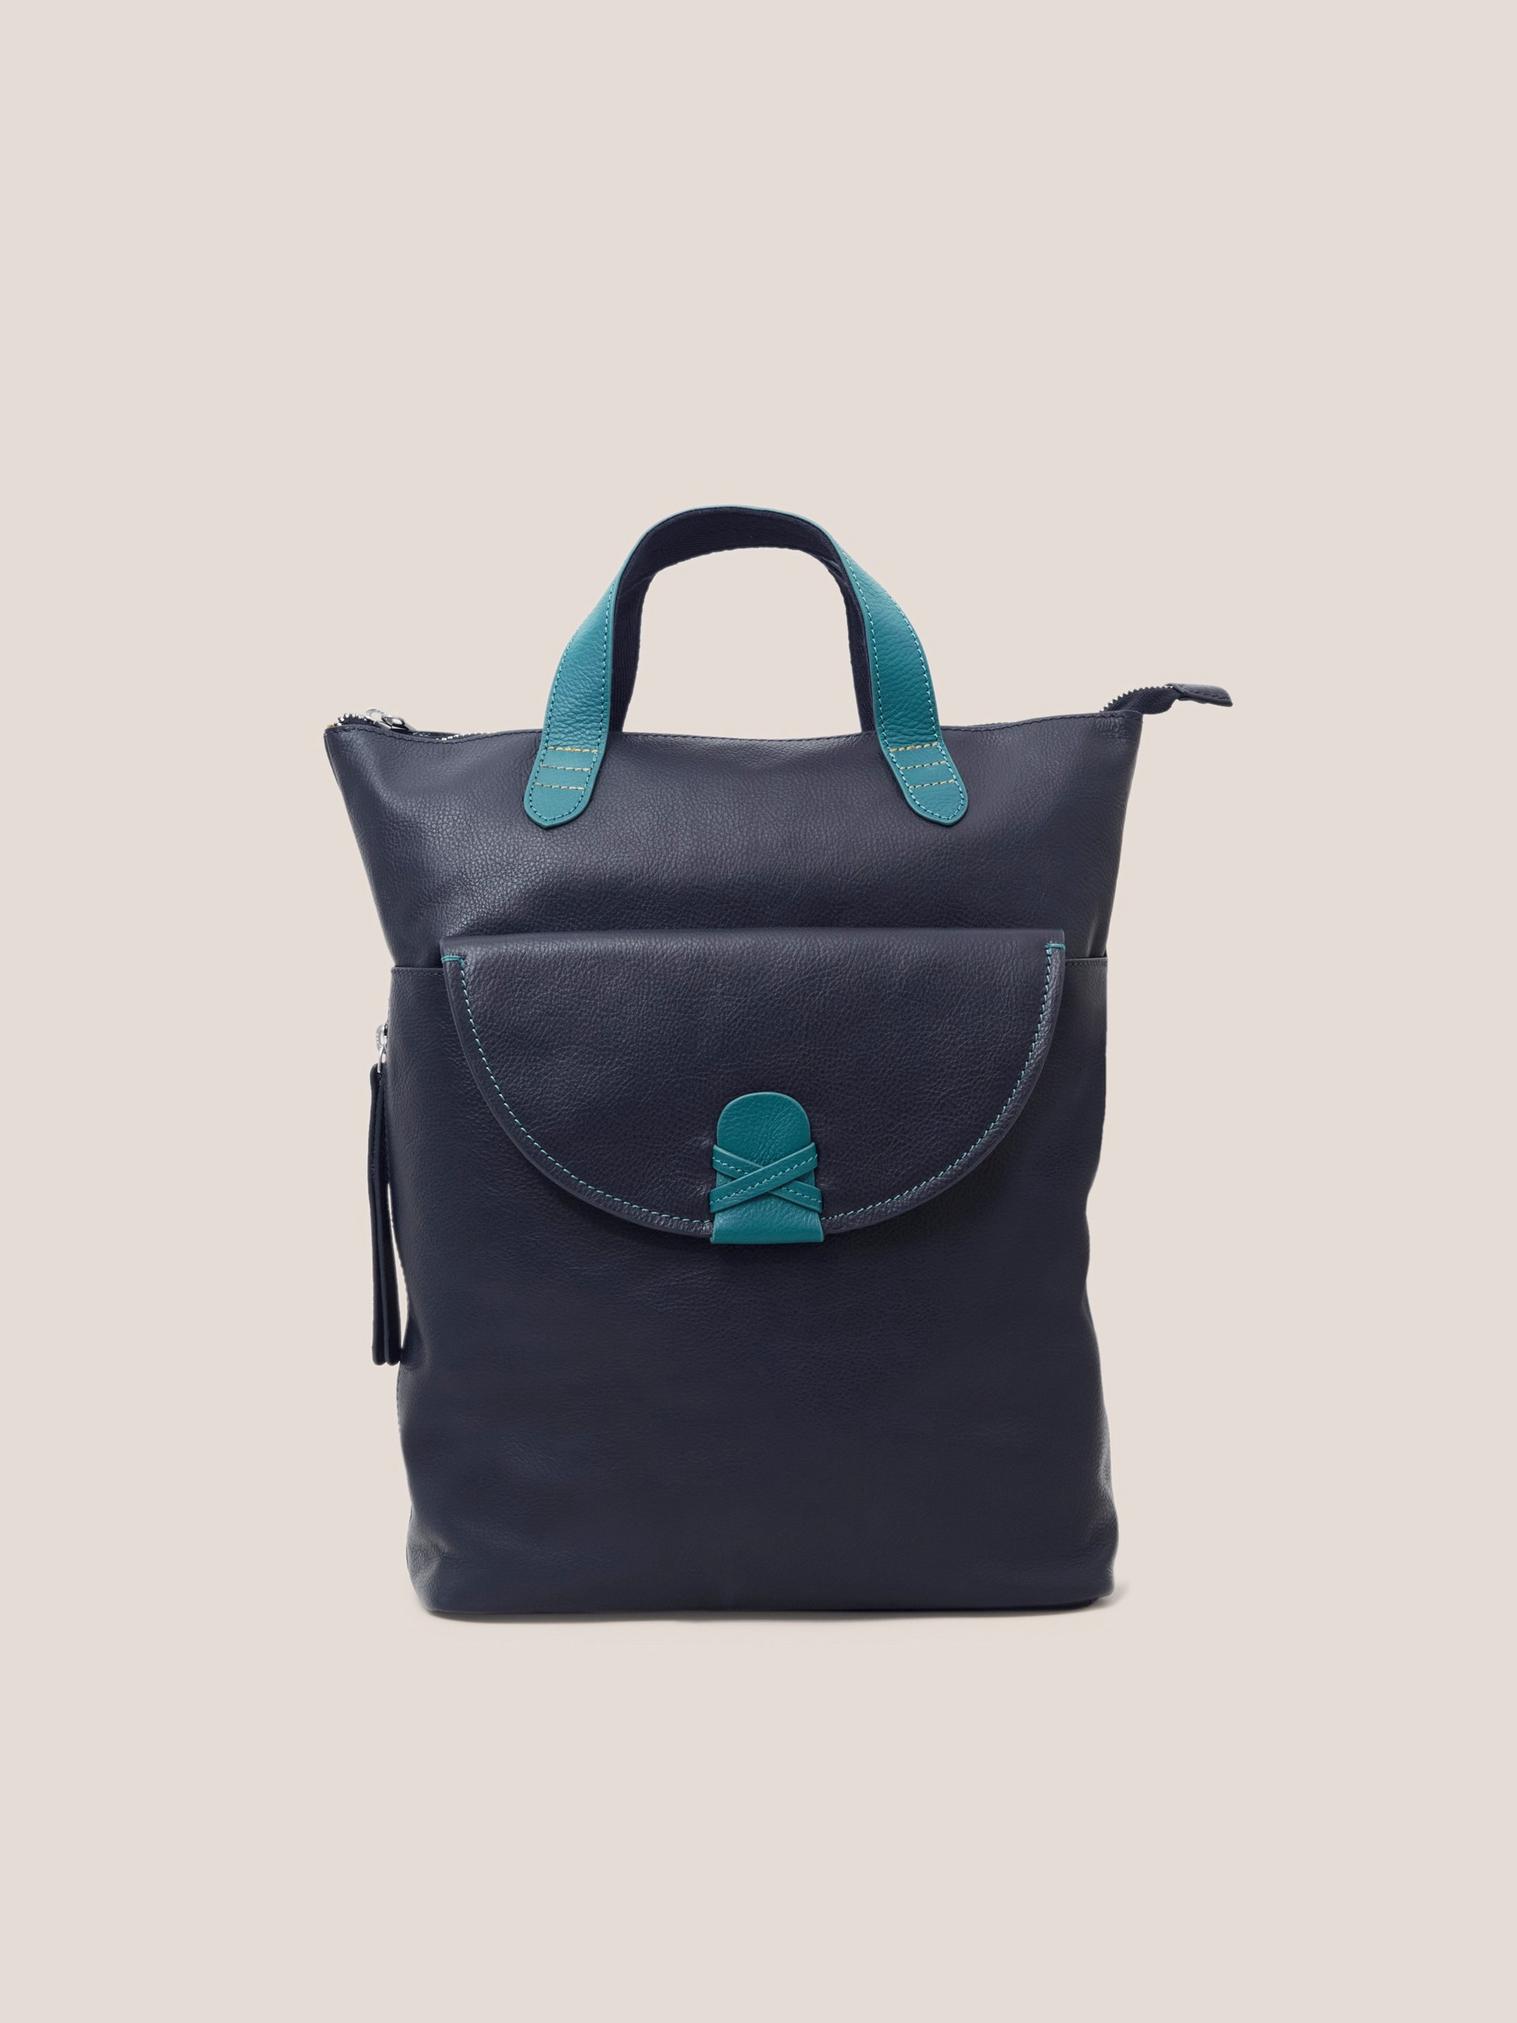 Flossy Convertible Leather Bag in NAVY MULTI - MODEL FRONT